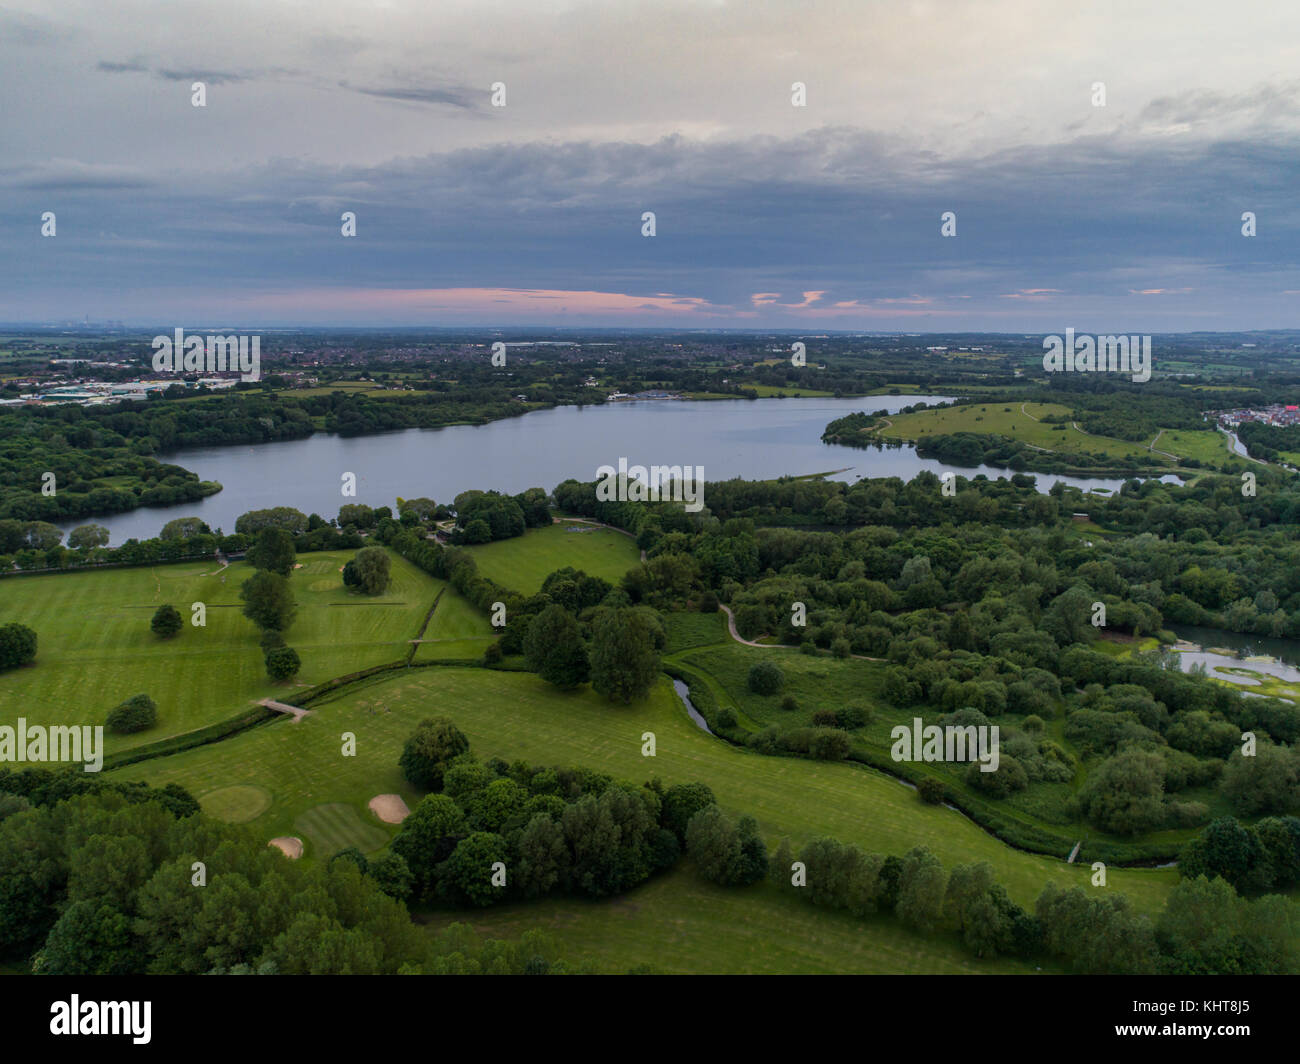 Pennington Flash County Park And Nature Reserve In Leigh, Greater Manchester, England, UK Stock Photo